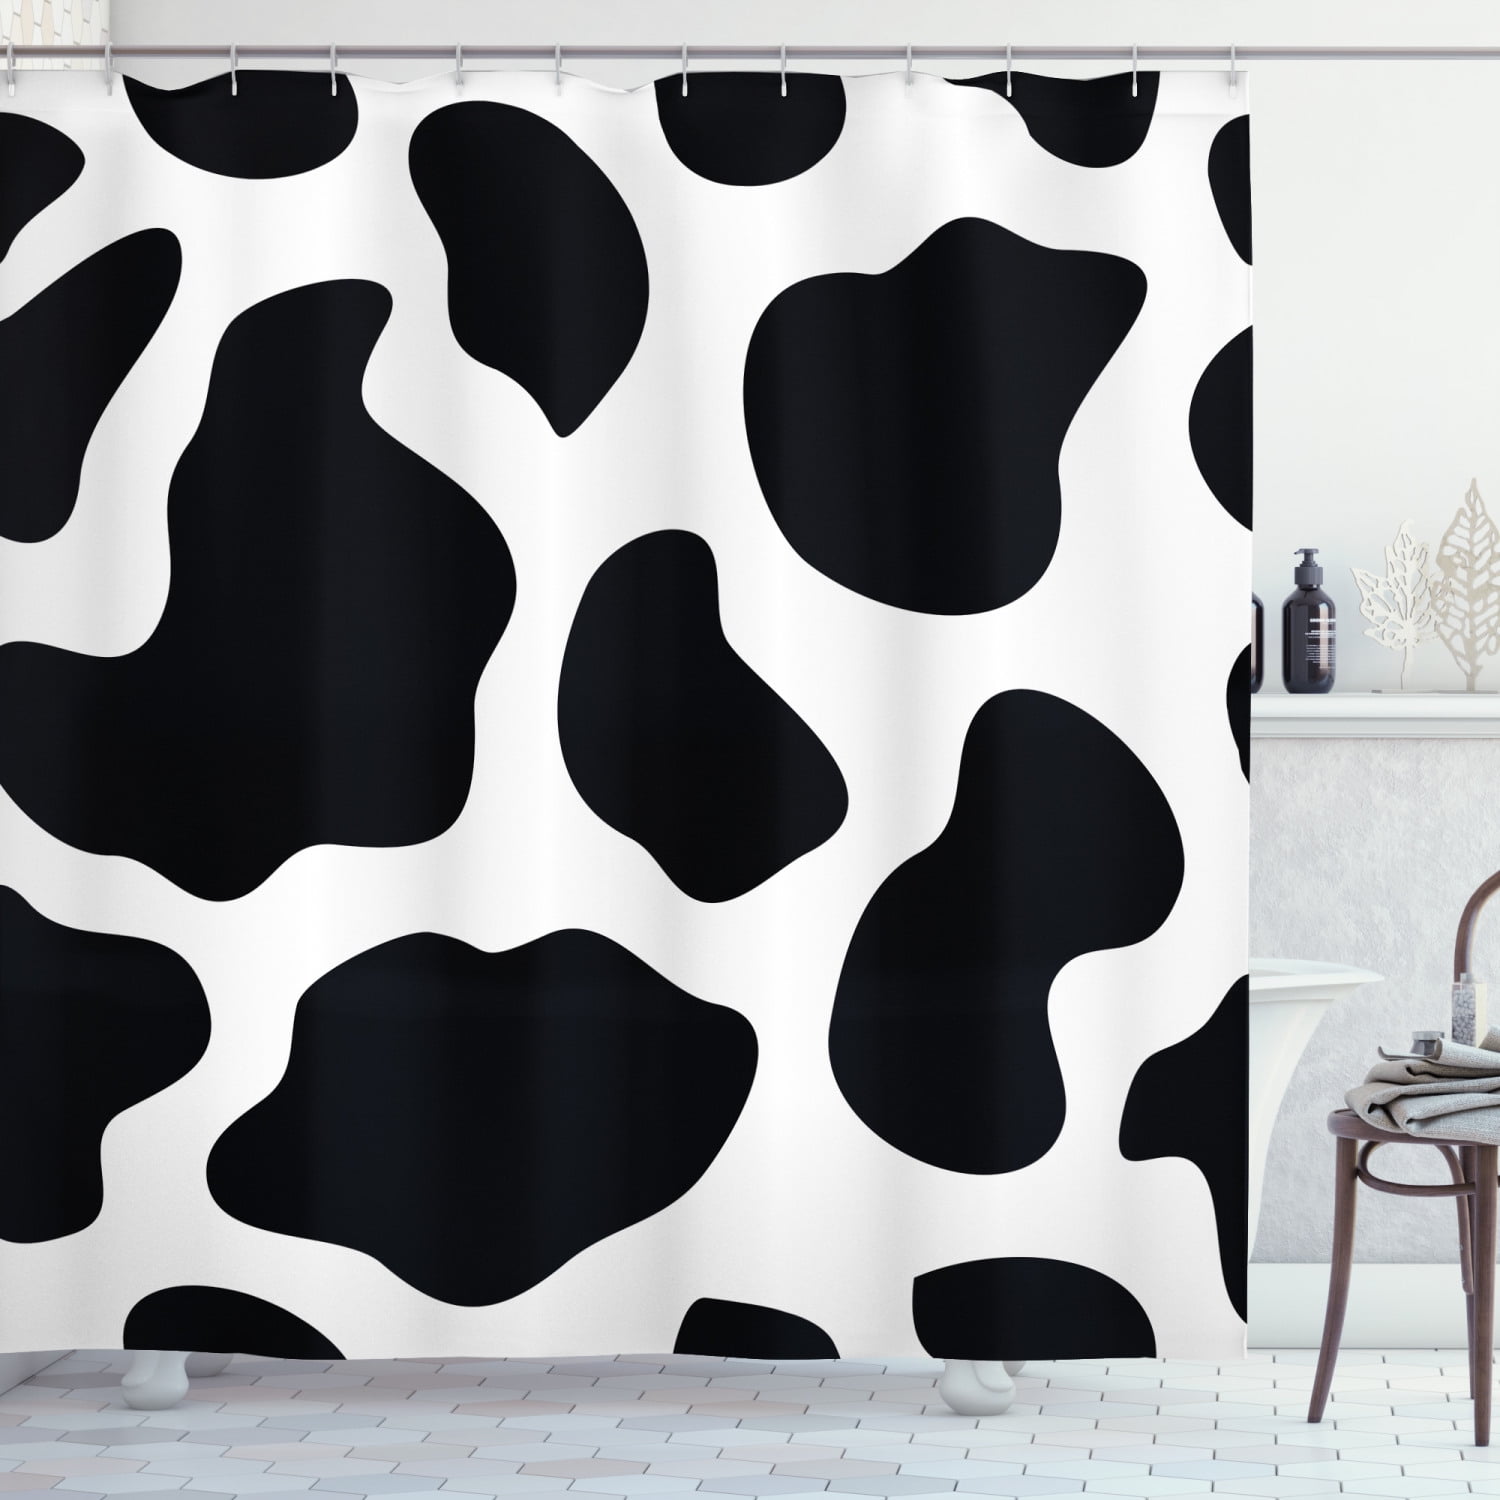 Eco-friendly Black and White Milk Cow Pattern Dairy Animal Pattern Shower Curtain Waterproof Bathroom Curtain Liner with Hook 60 x 72